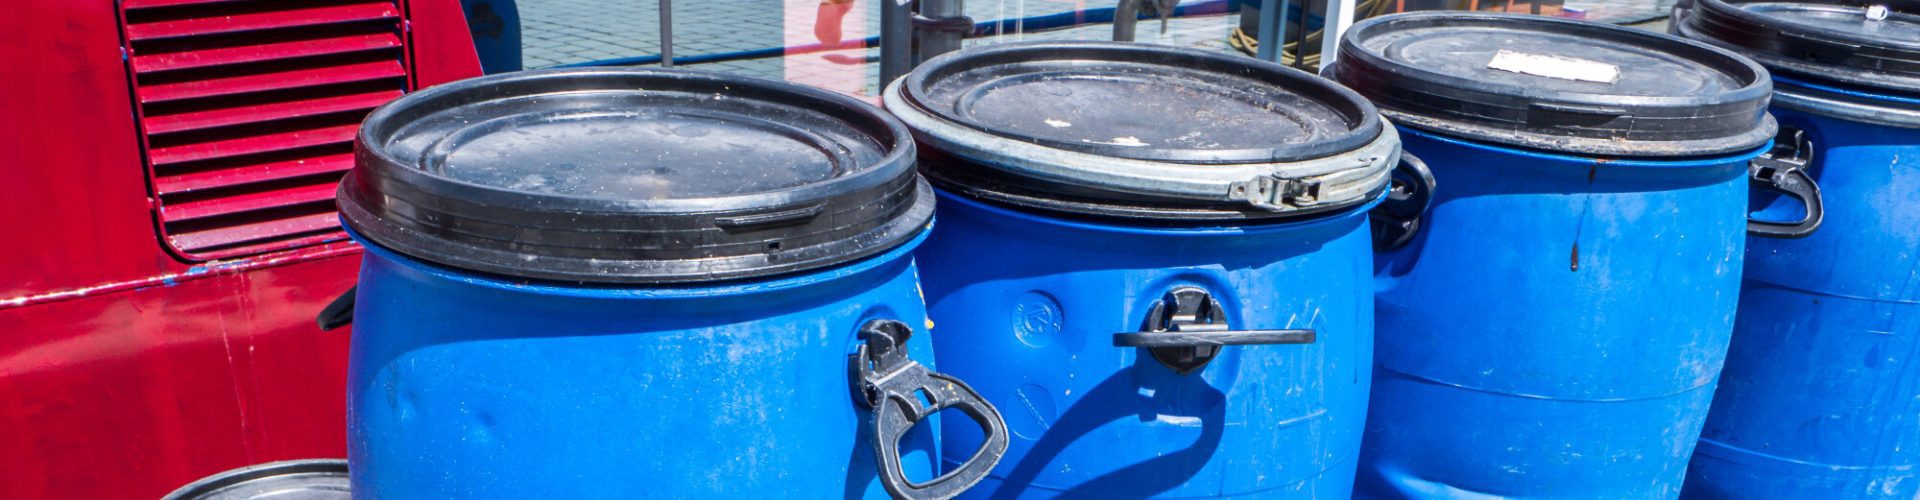 Guidance for Cradle to Grave Waste Management Compliance